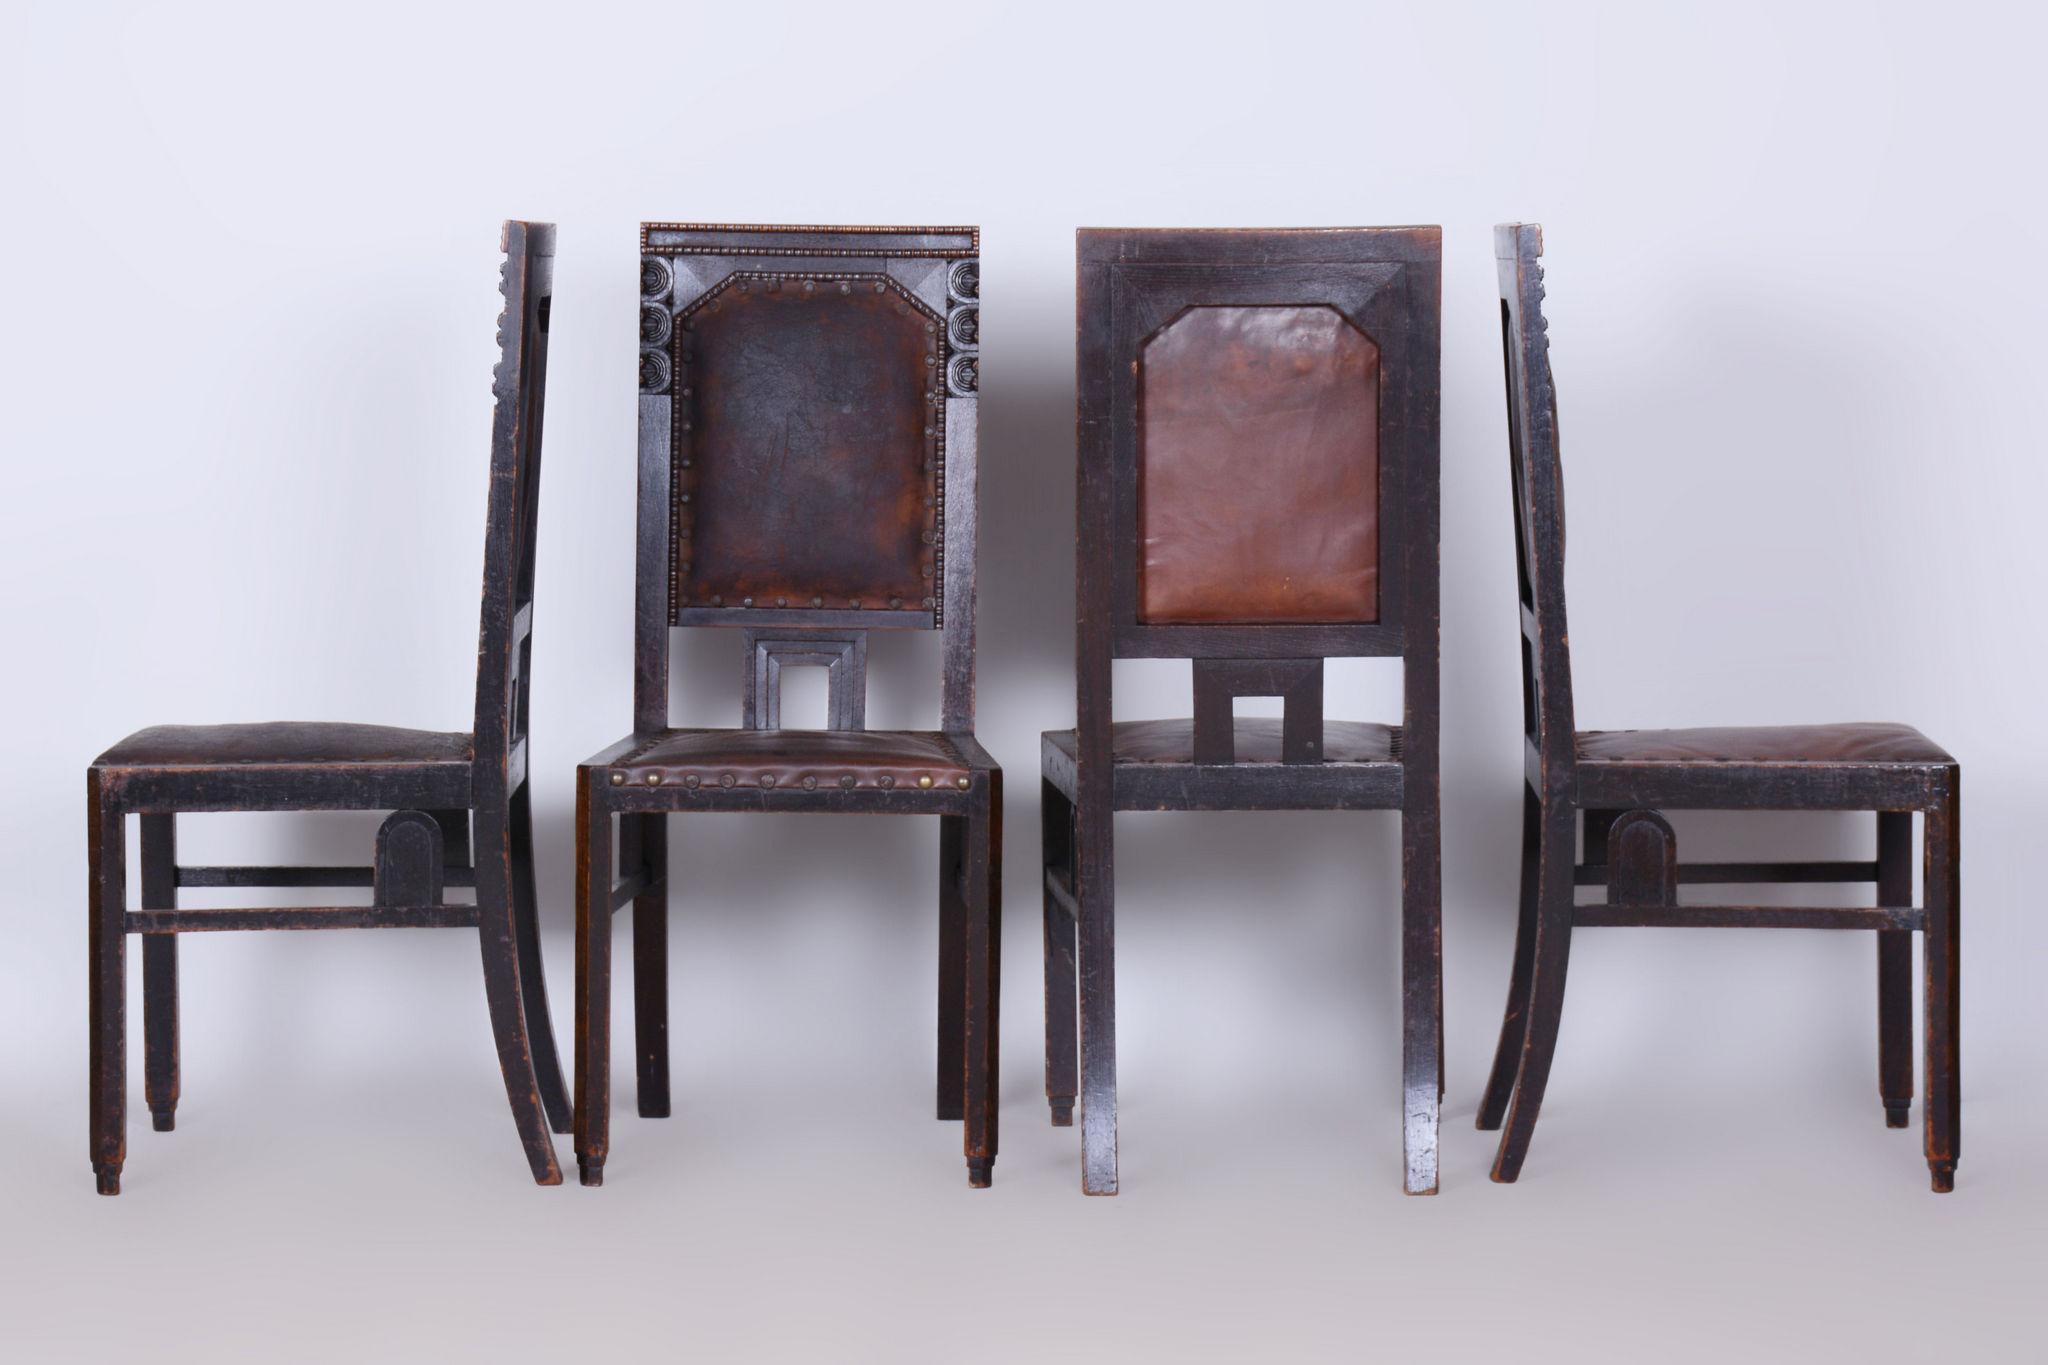 Art Deco Set of Four Cubist Chairs, by Josef Gočár, Solid Oak, Red Leather, Czech, 1910s For Sale